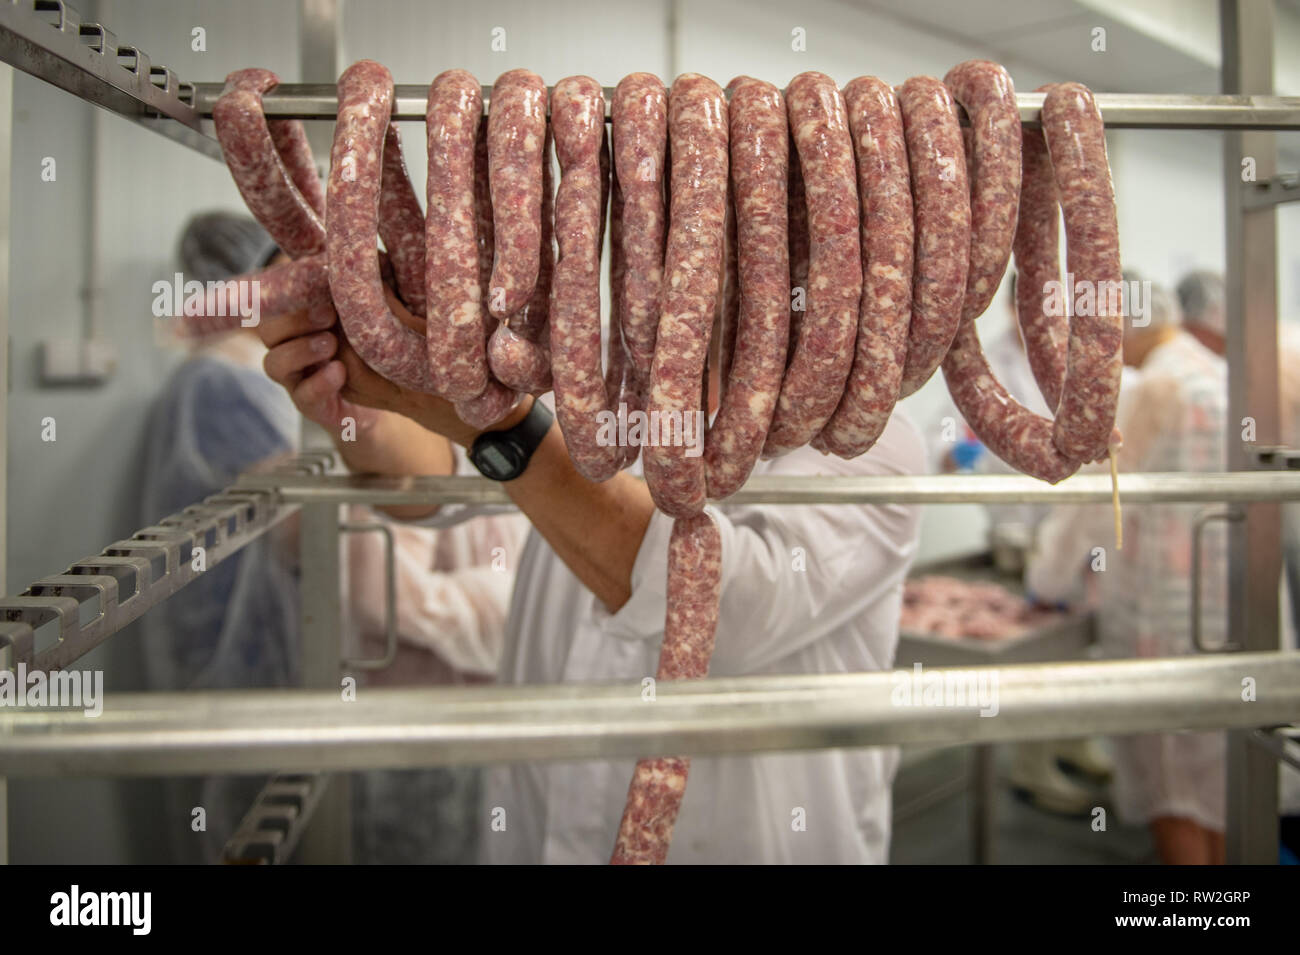 Links of freshly cased sausage hung on rack ready to be cooked, Radom, Masovian Voivodeship, Poland Stock Photo